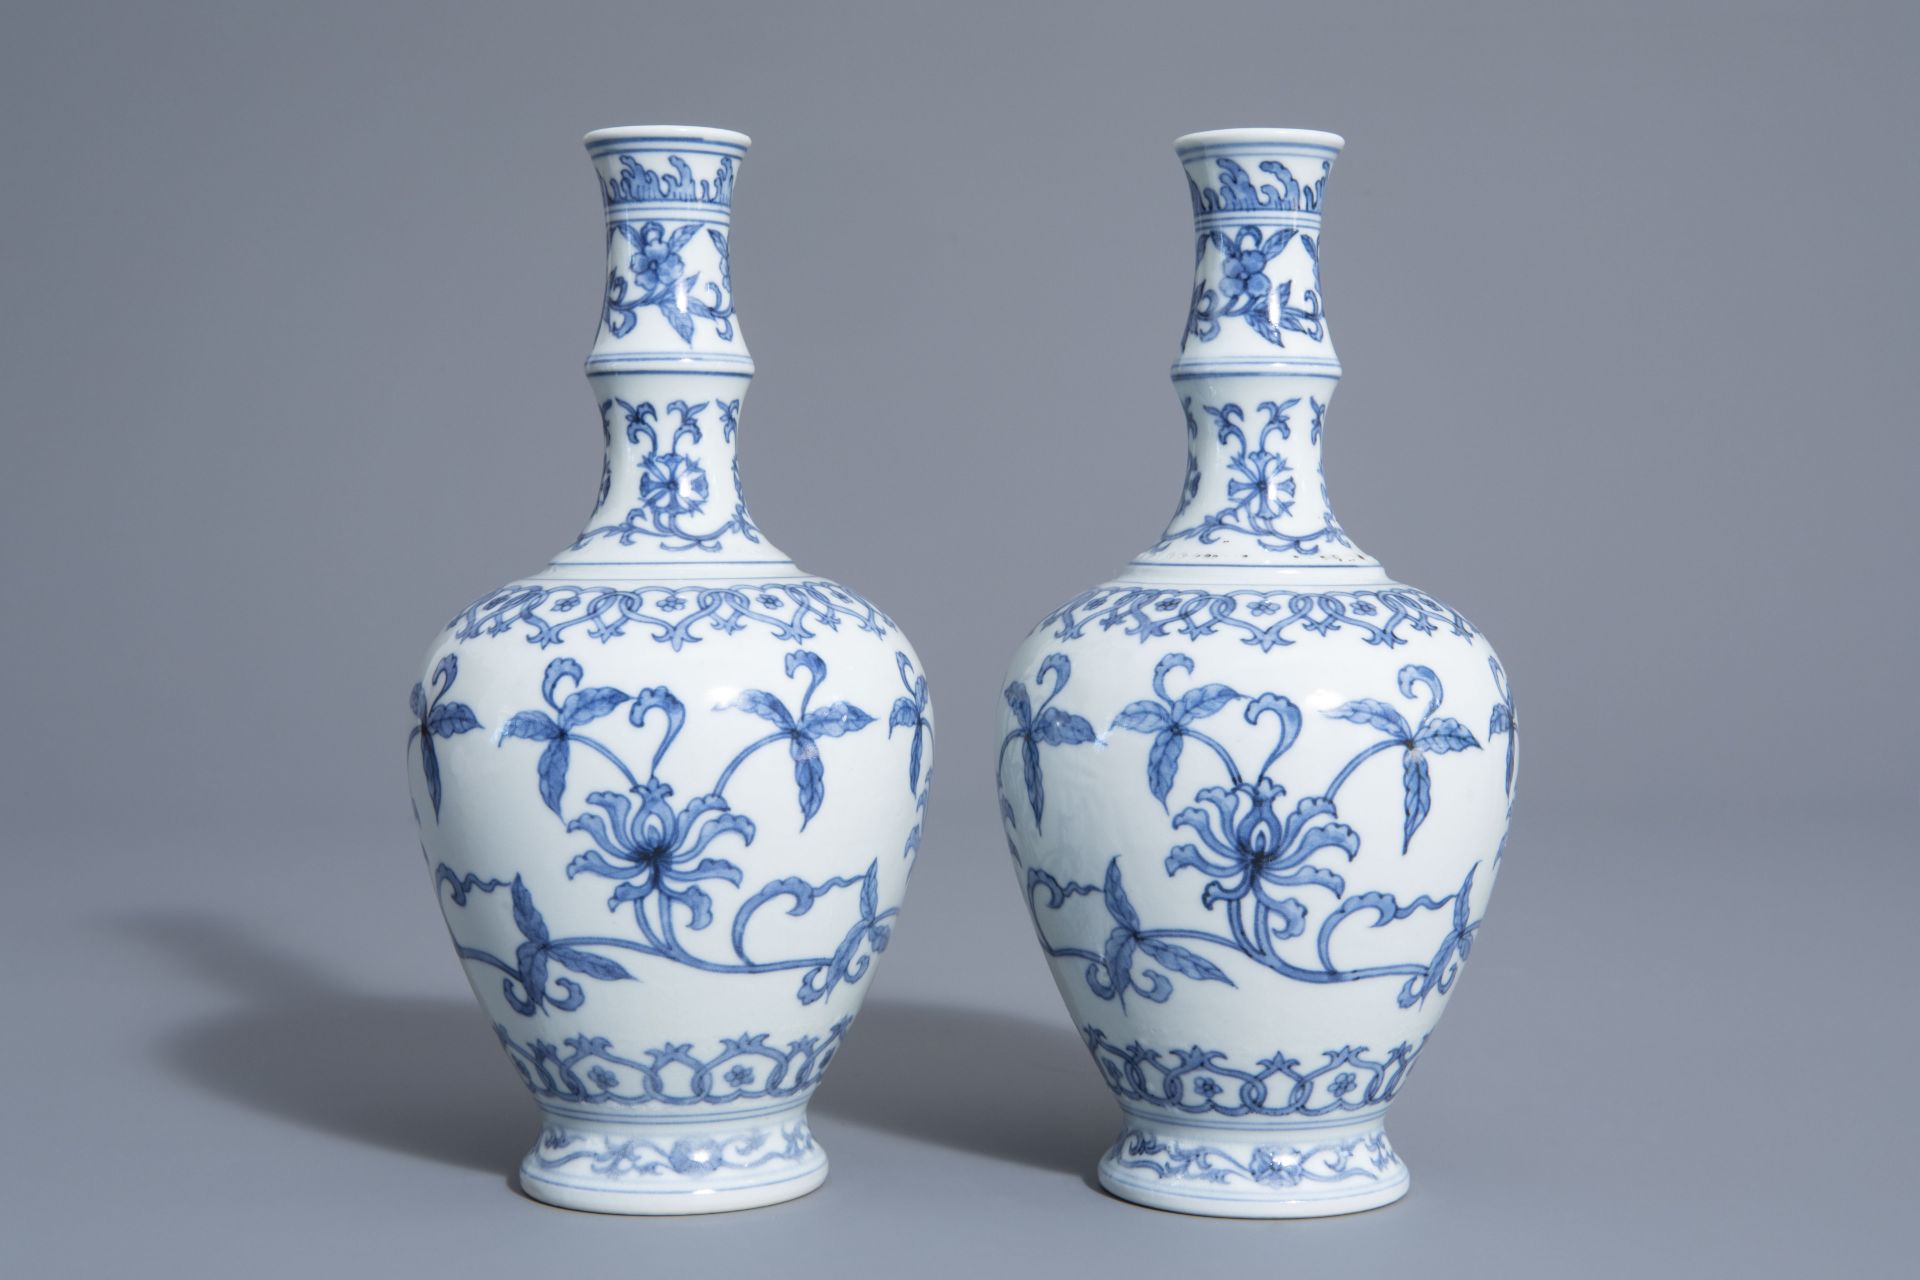 A pair of Chinese blue and white vases with floral design, Chenghua mark, 19th/20th C.